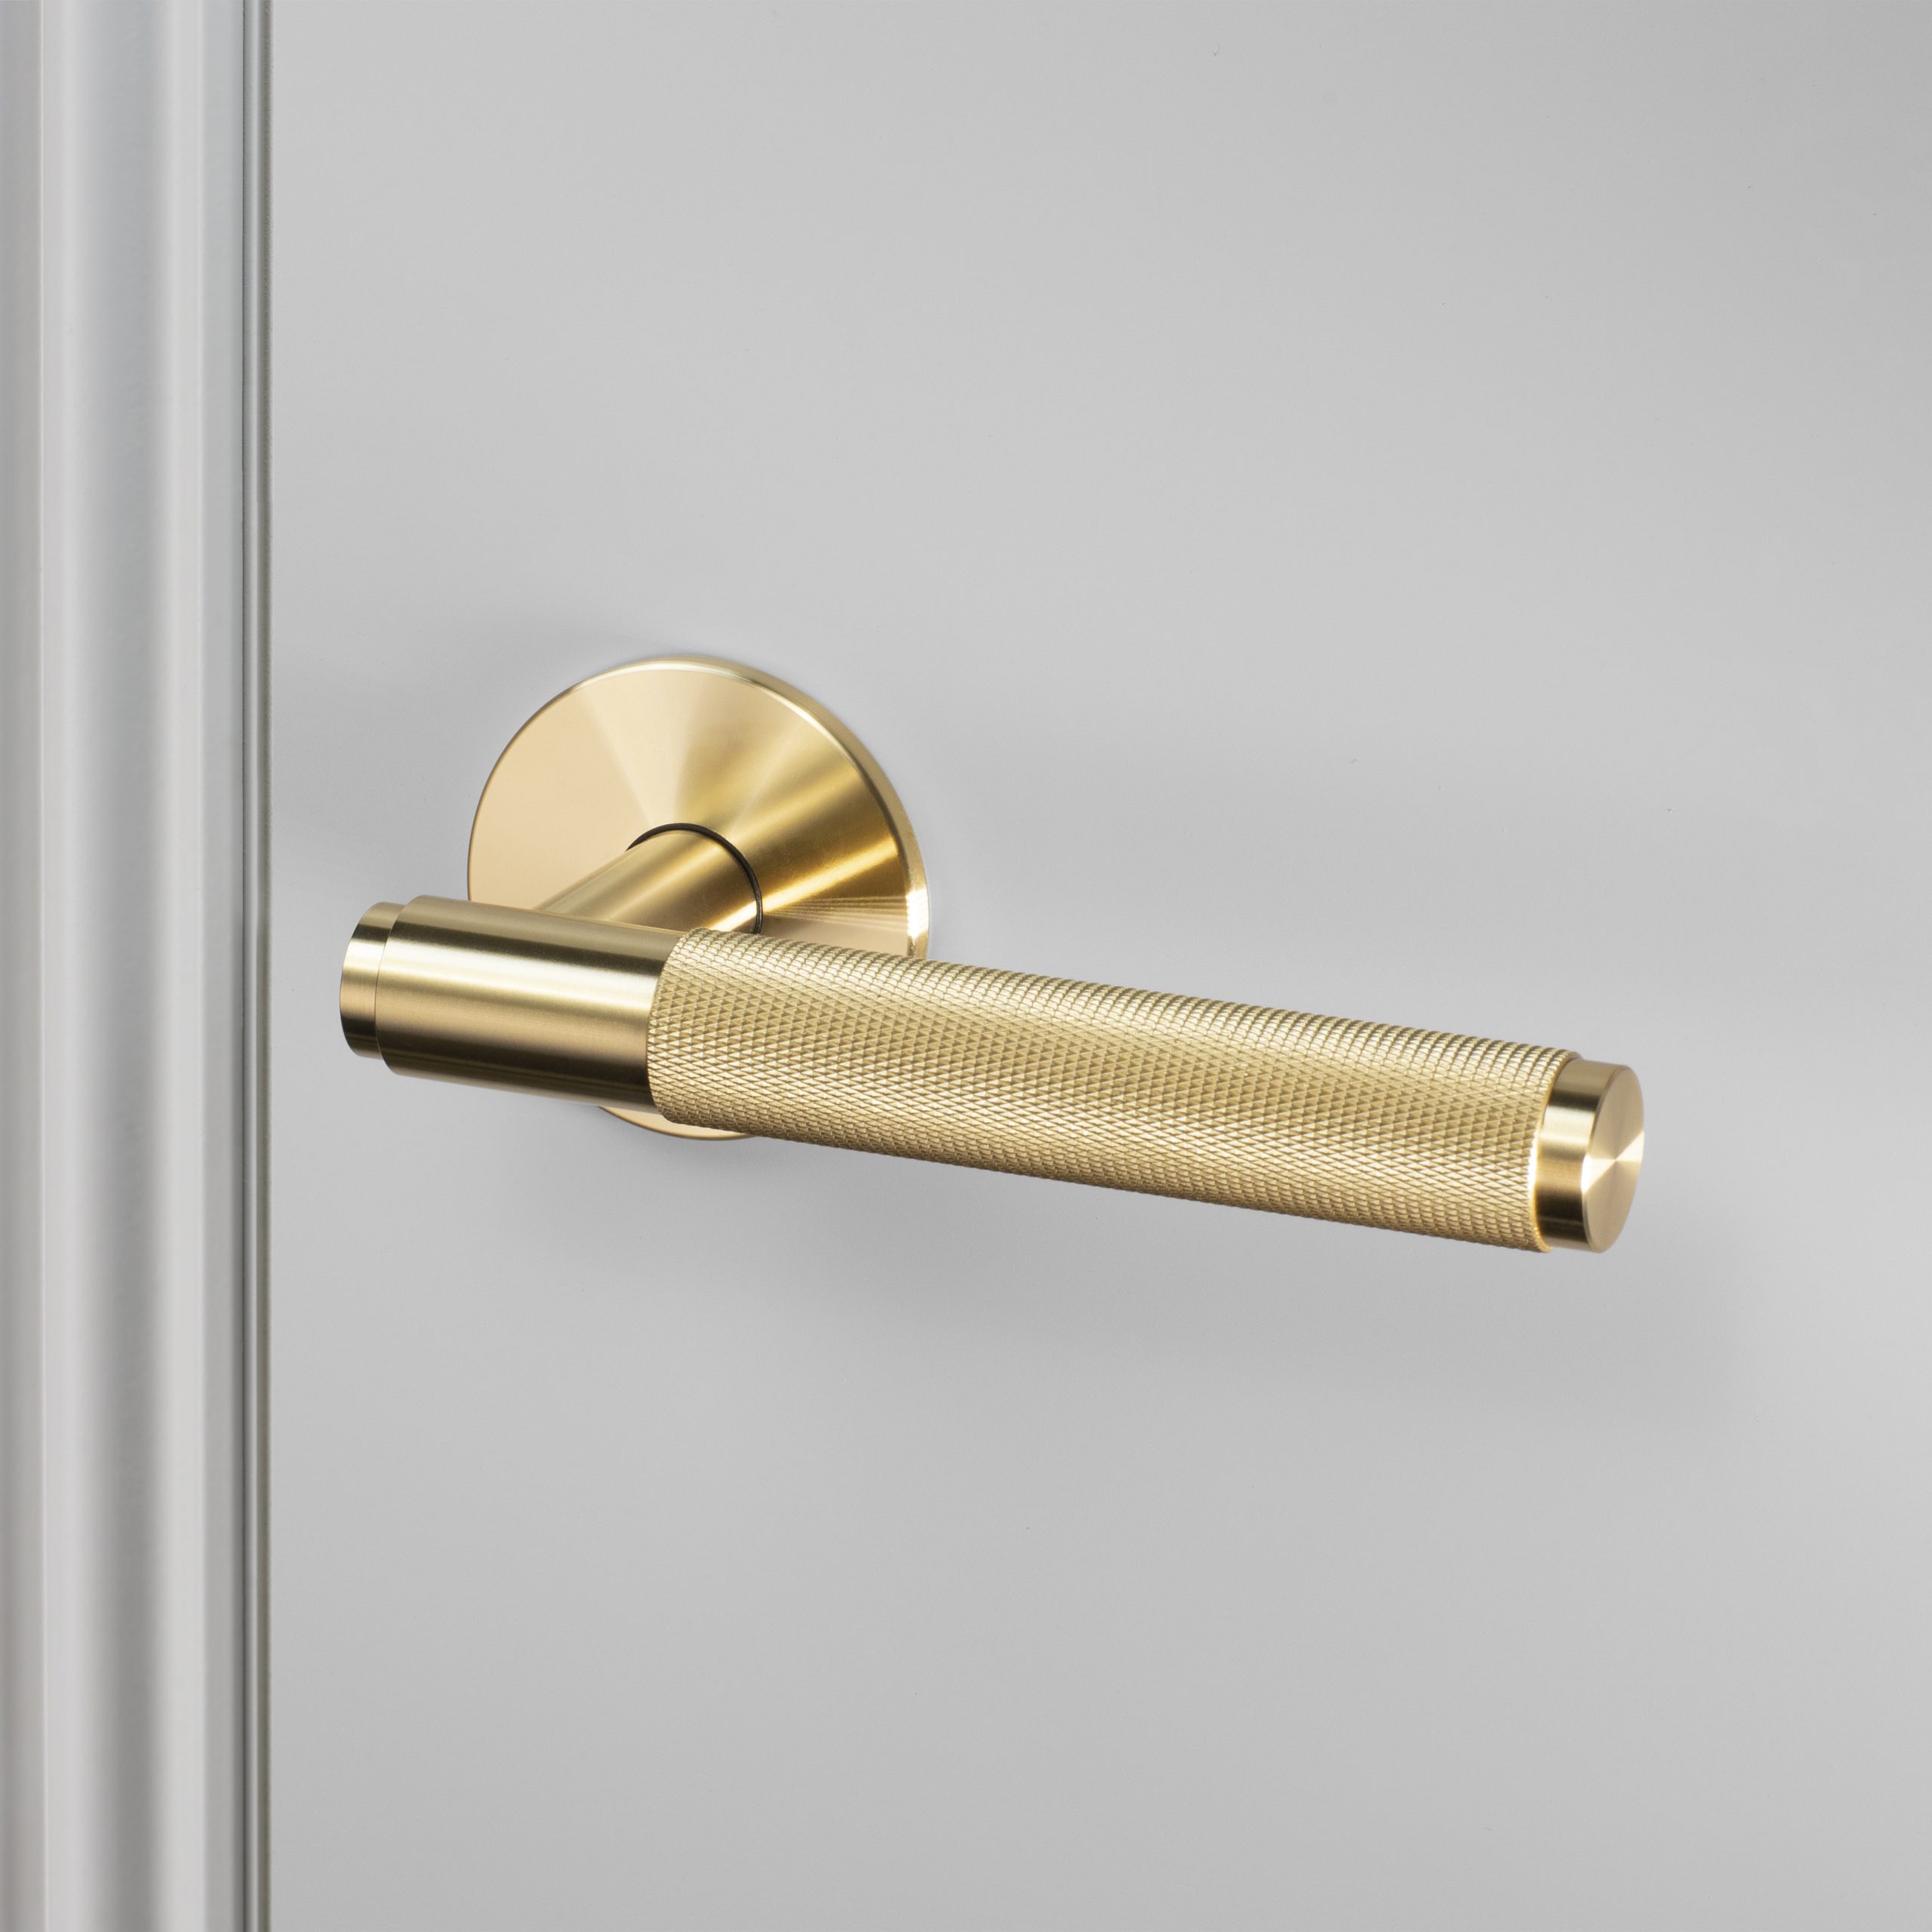 https://www.busterandpunch.com/us/wp-content/uploads/sites/2/2020/03/1.-BusterPunch_Door_Handle_Right_Fixed_Brass-scaled.jpg